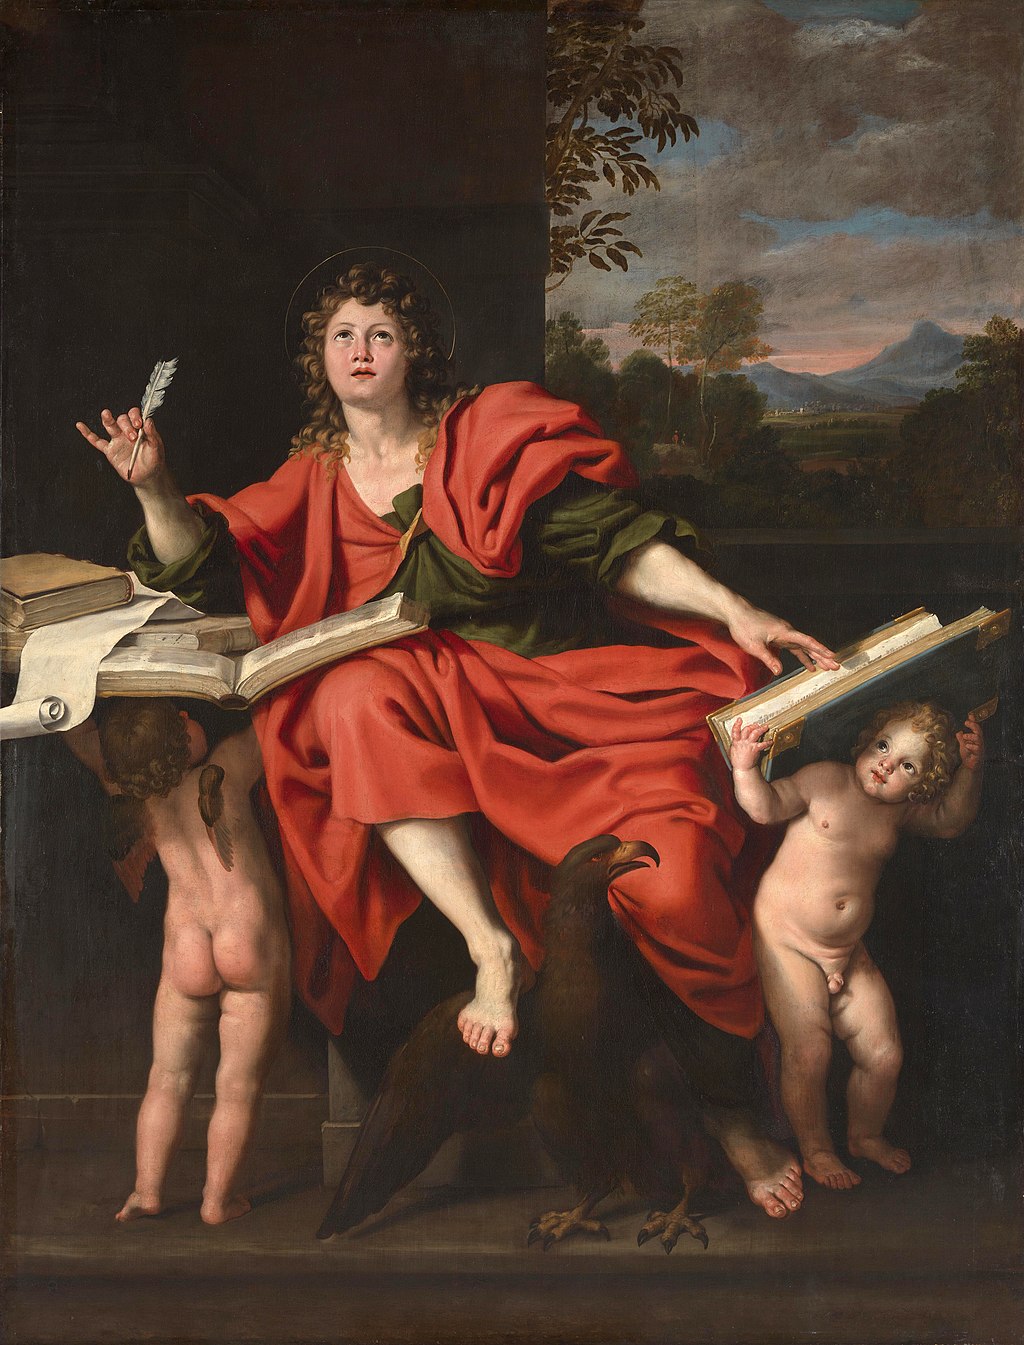 A painting 15th-century painting depicting St. John the Evangelist by Domenichino